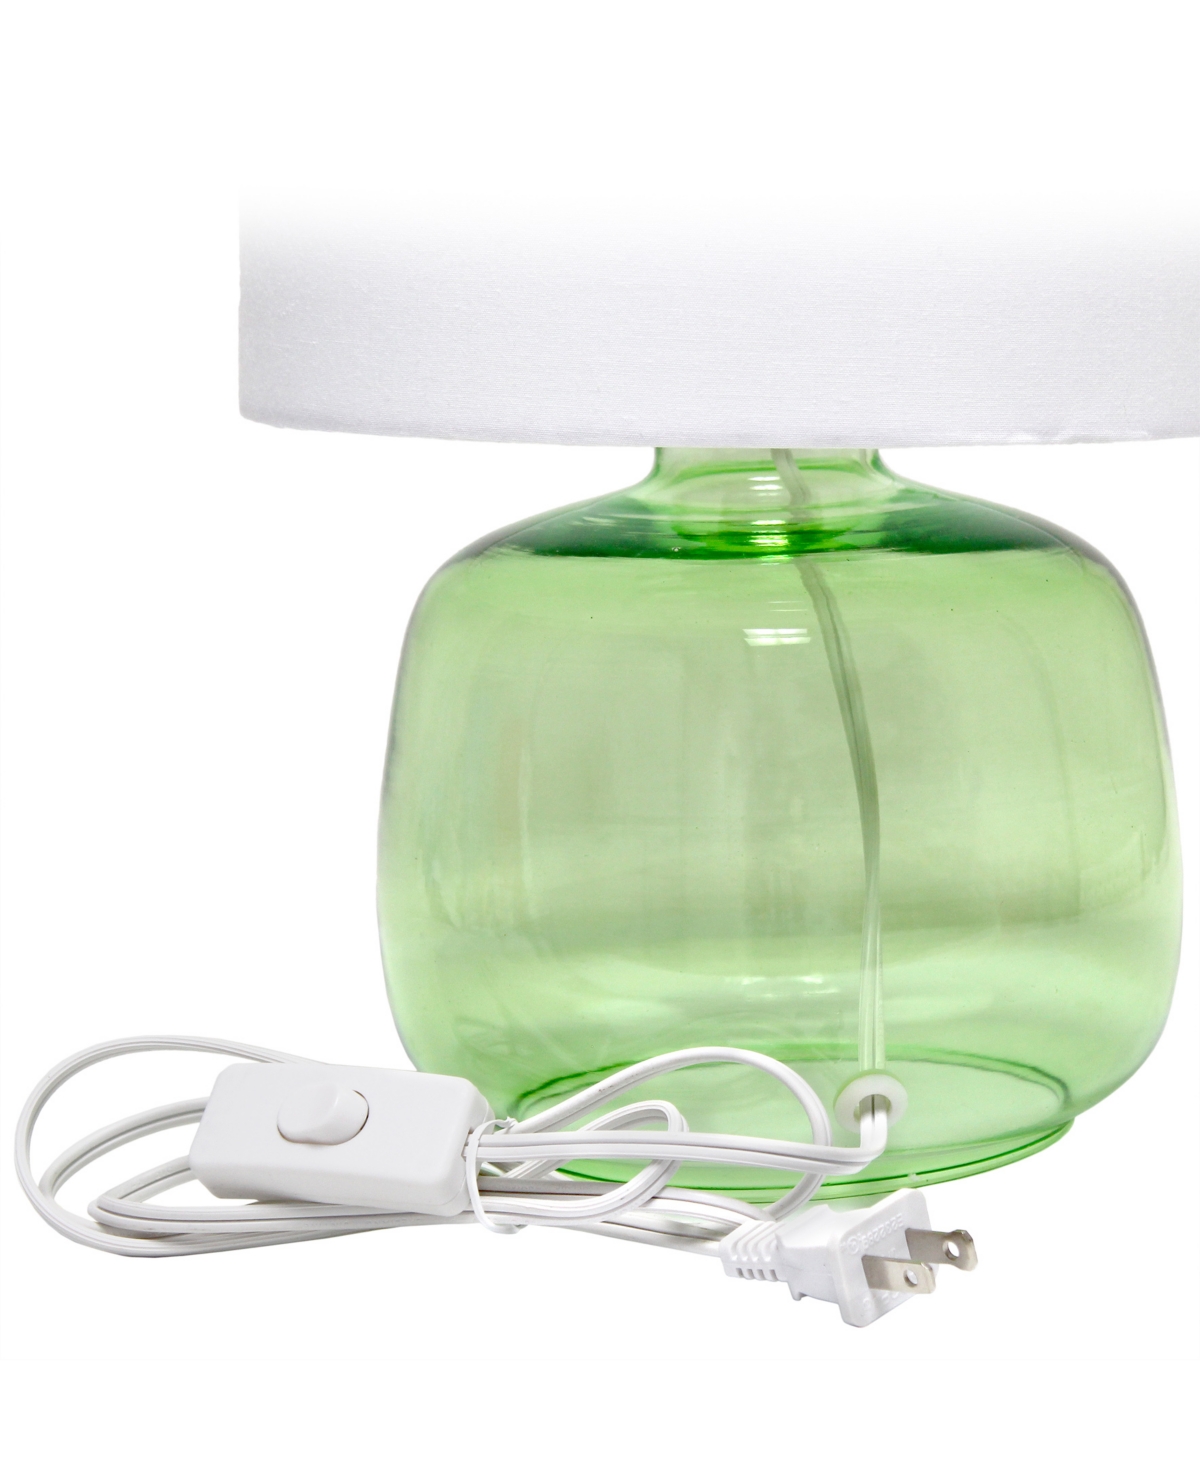 Shop Simple Designs Glass Table Lamp With Fabric Shade, Green With White Shade In Smoke,gray